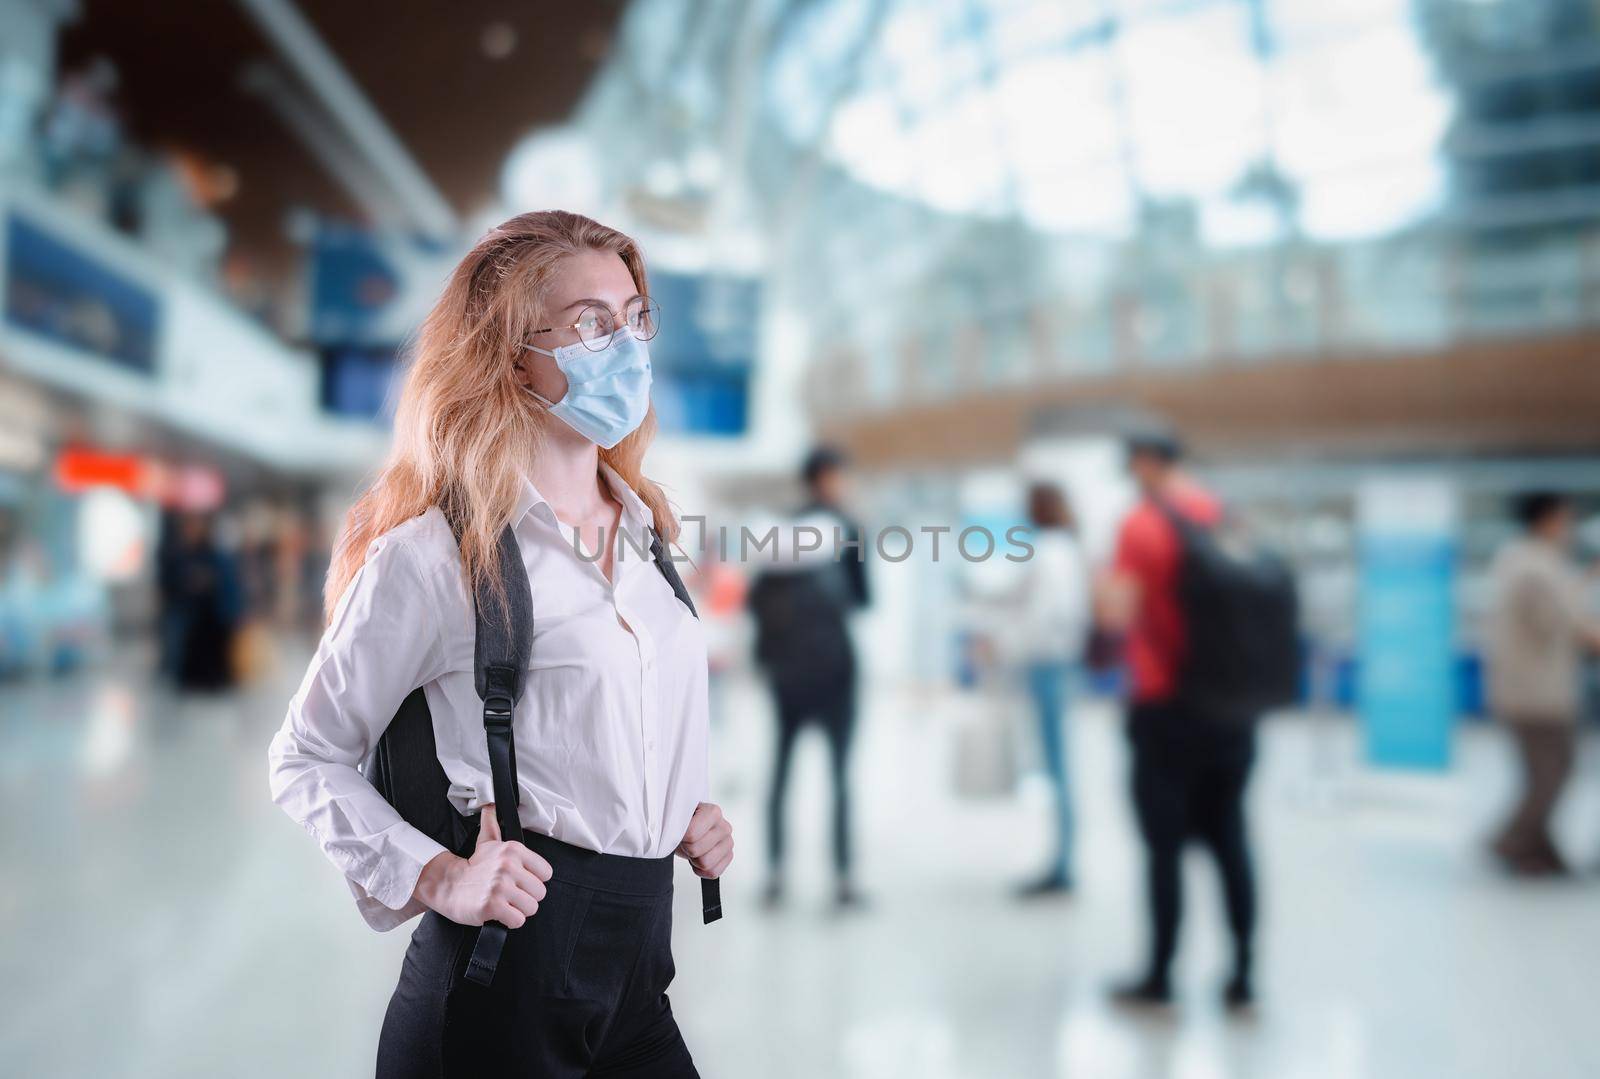 Tourist Woman With Protection Face Mask at The Airport Terminal in Coronavirus Covid-19 Pandemic, Defensive Measure for Travel Restrictions of Tourist During Covid 19 Outbreak. Healthcare/Medical by MahaHeang245789